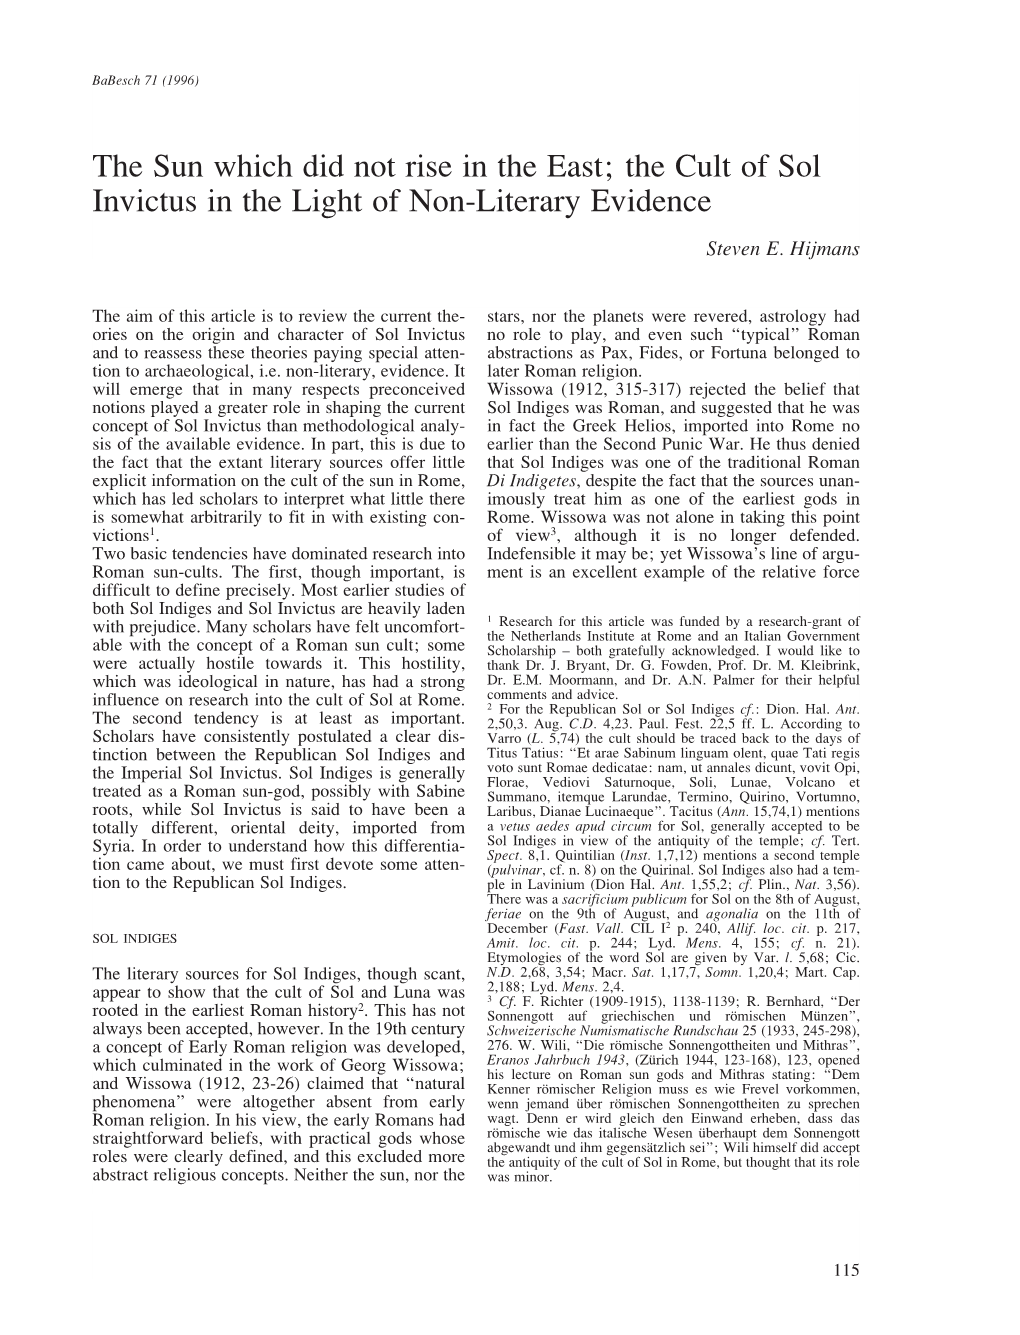 The Cult of Sol Invictus in the Light of Non-Literary Evidence